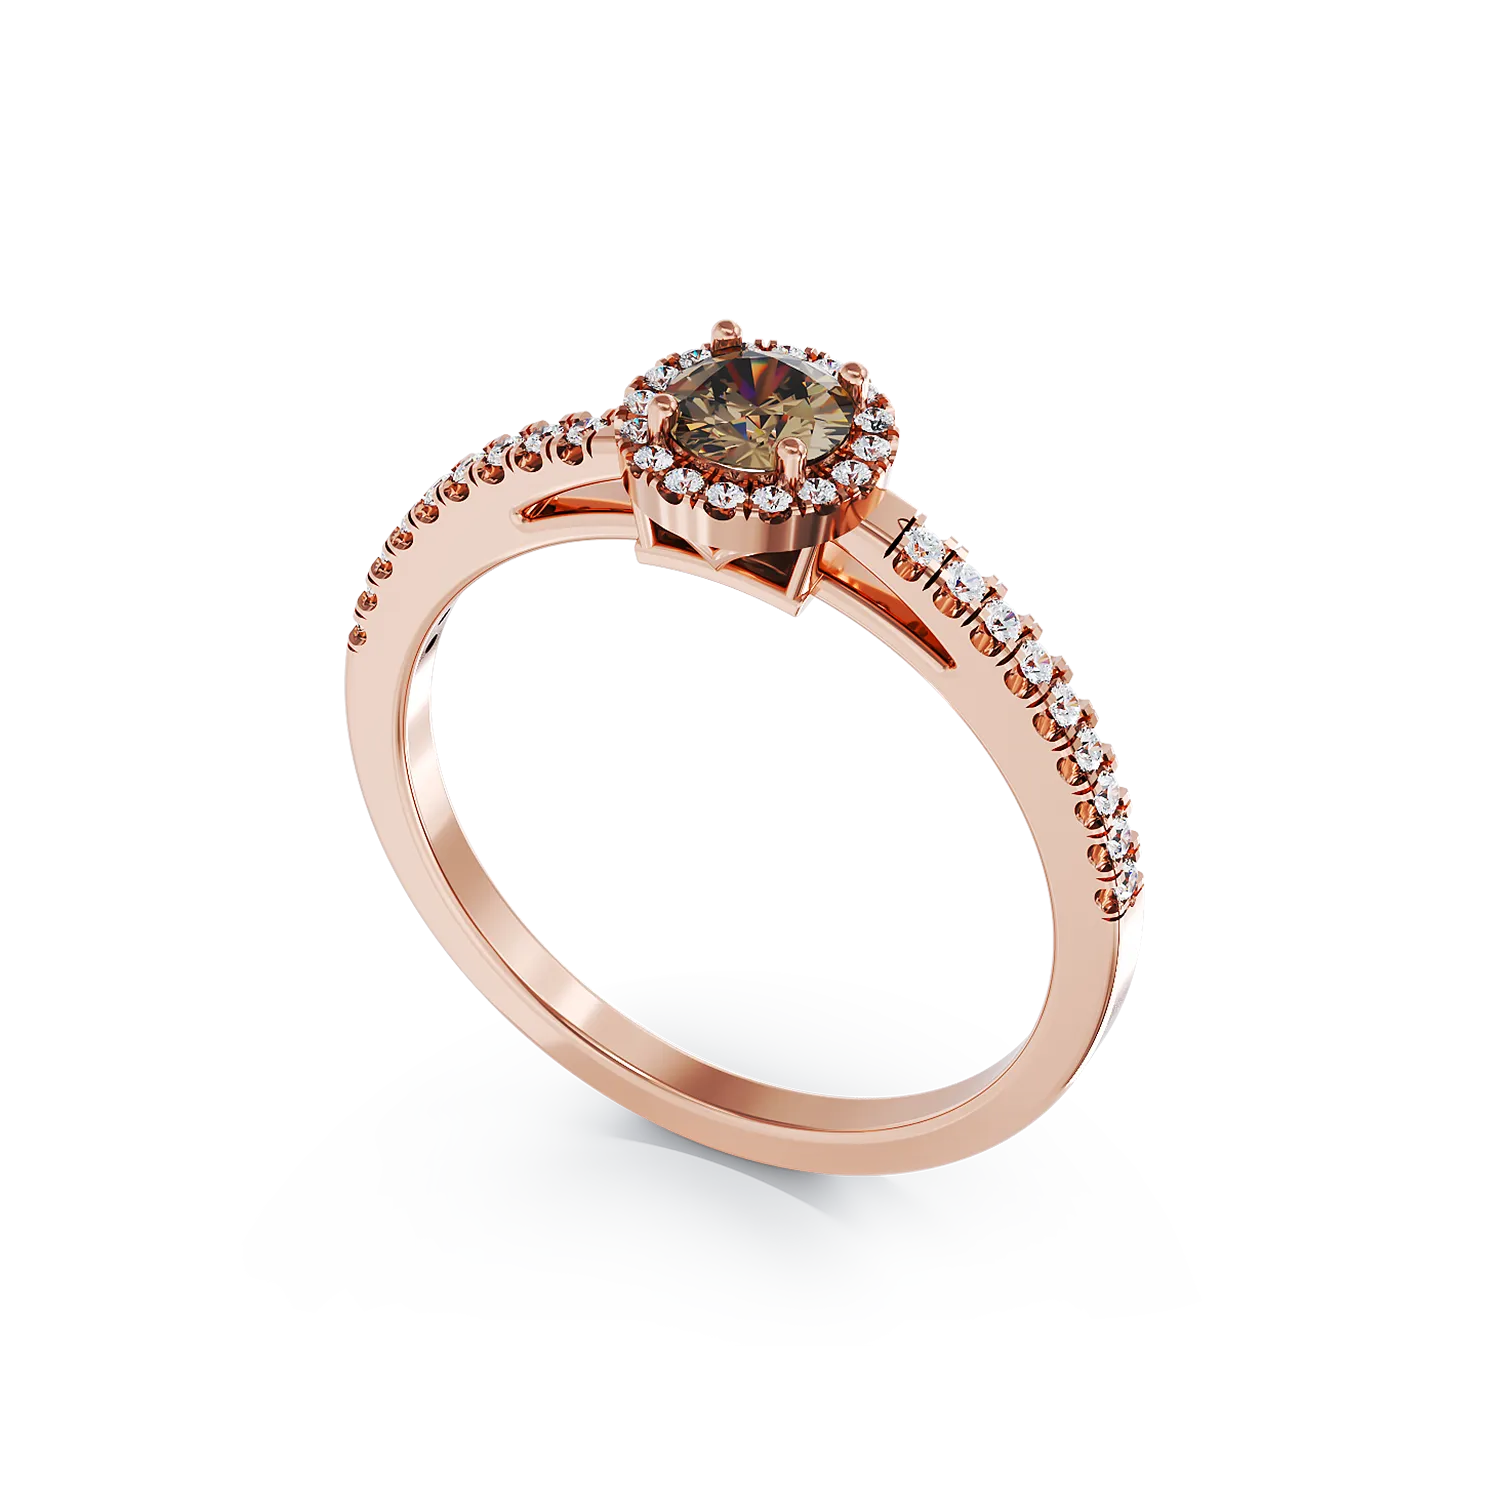 18K rose gold engagement ring with 0.3ct brown diamond and 0.2ct clear diamonds